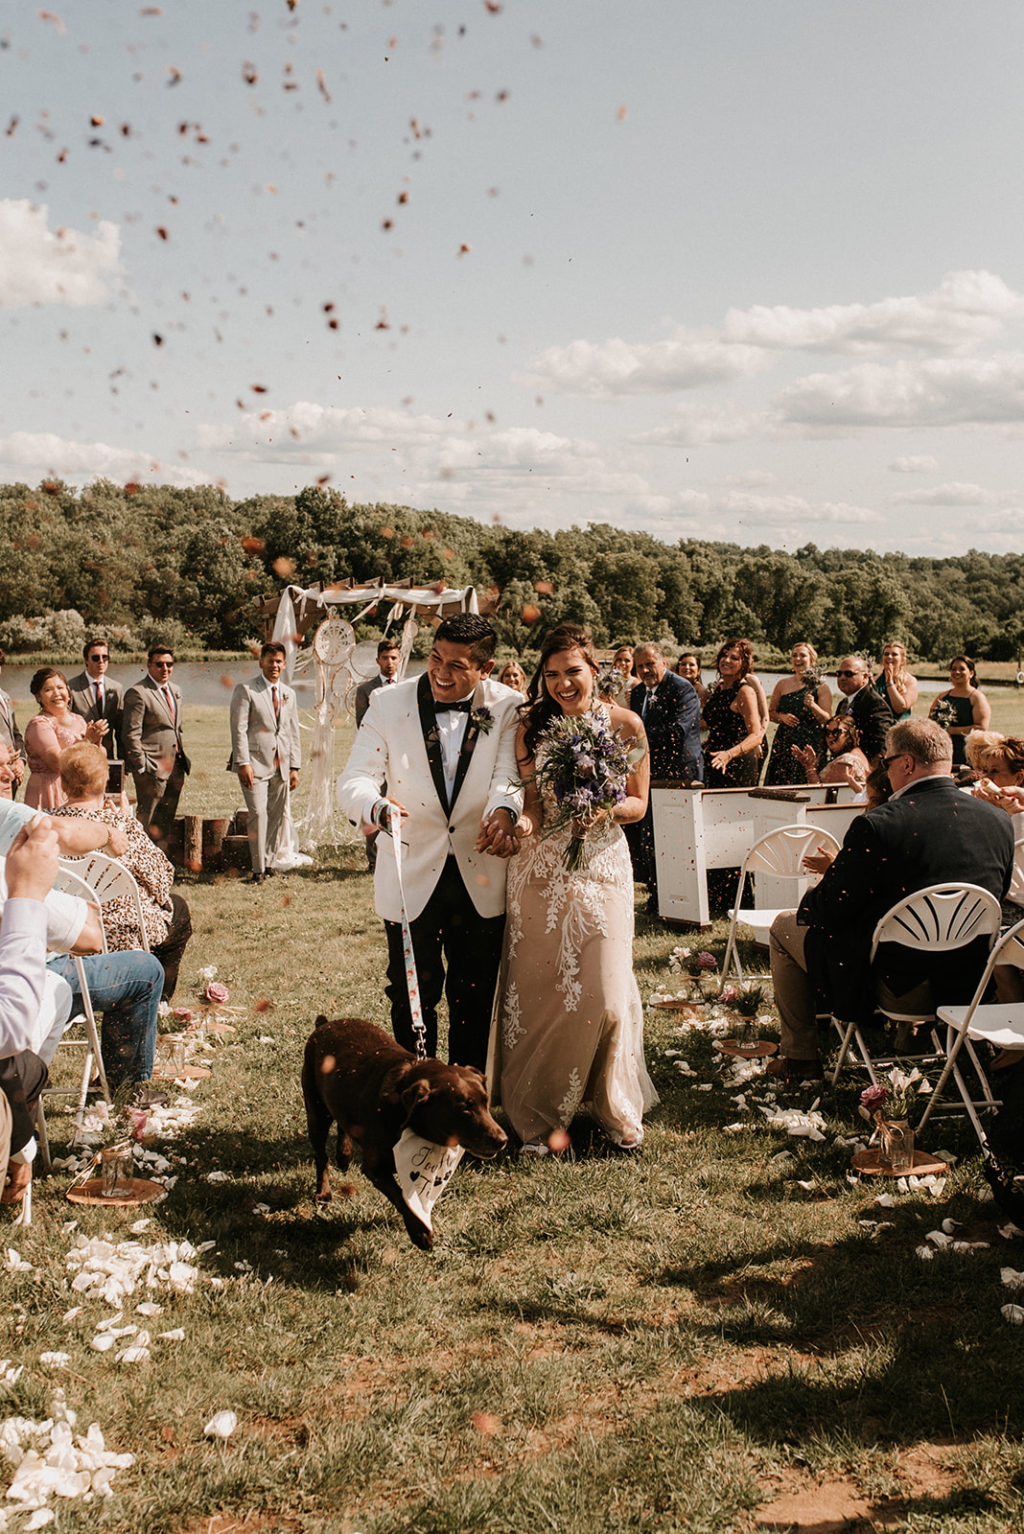 Rustic Luxe Ethical Wedding At Born To Run Farm, New Jersey